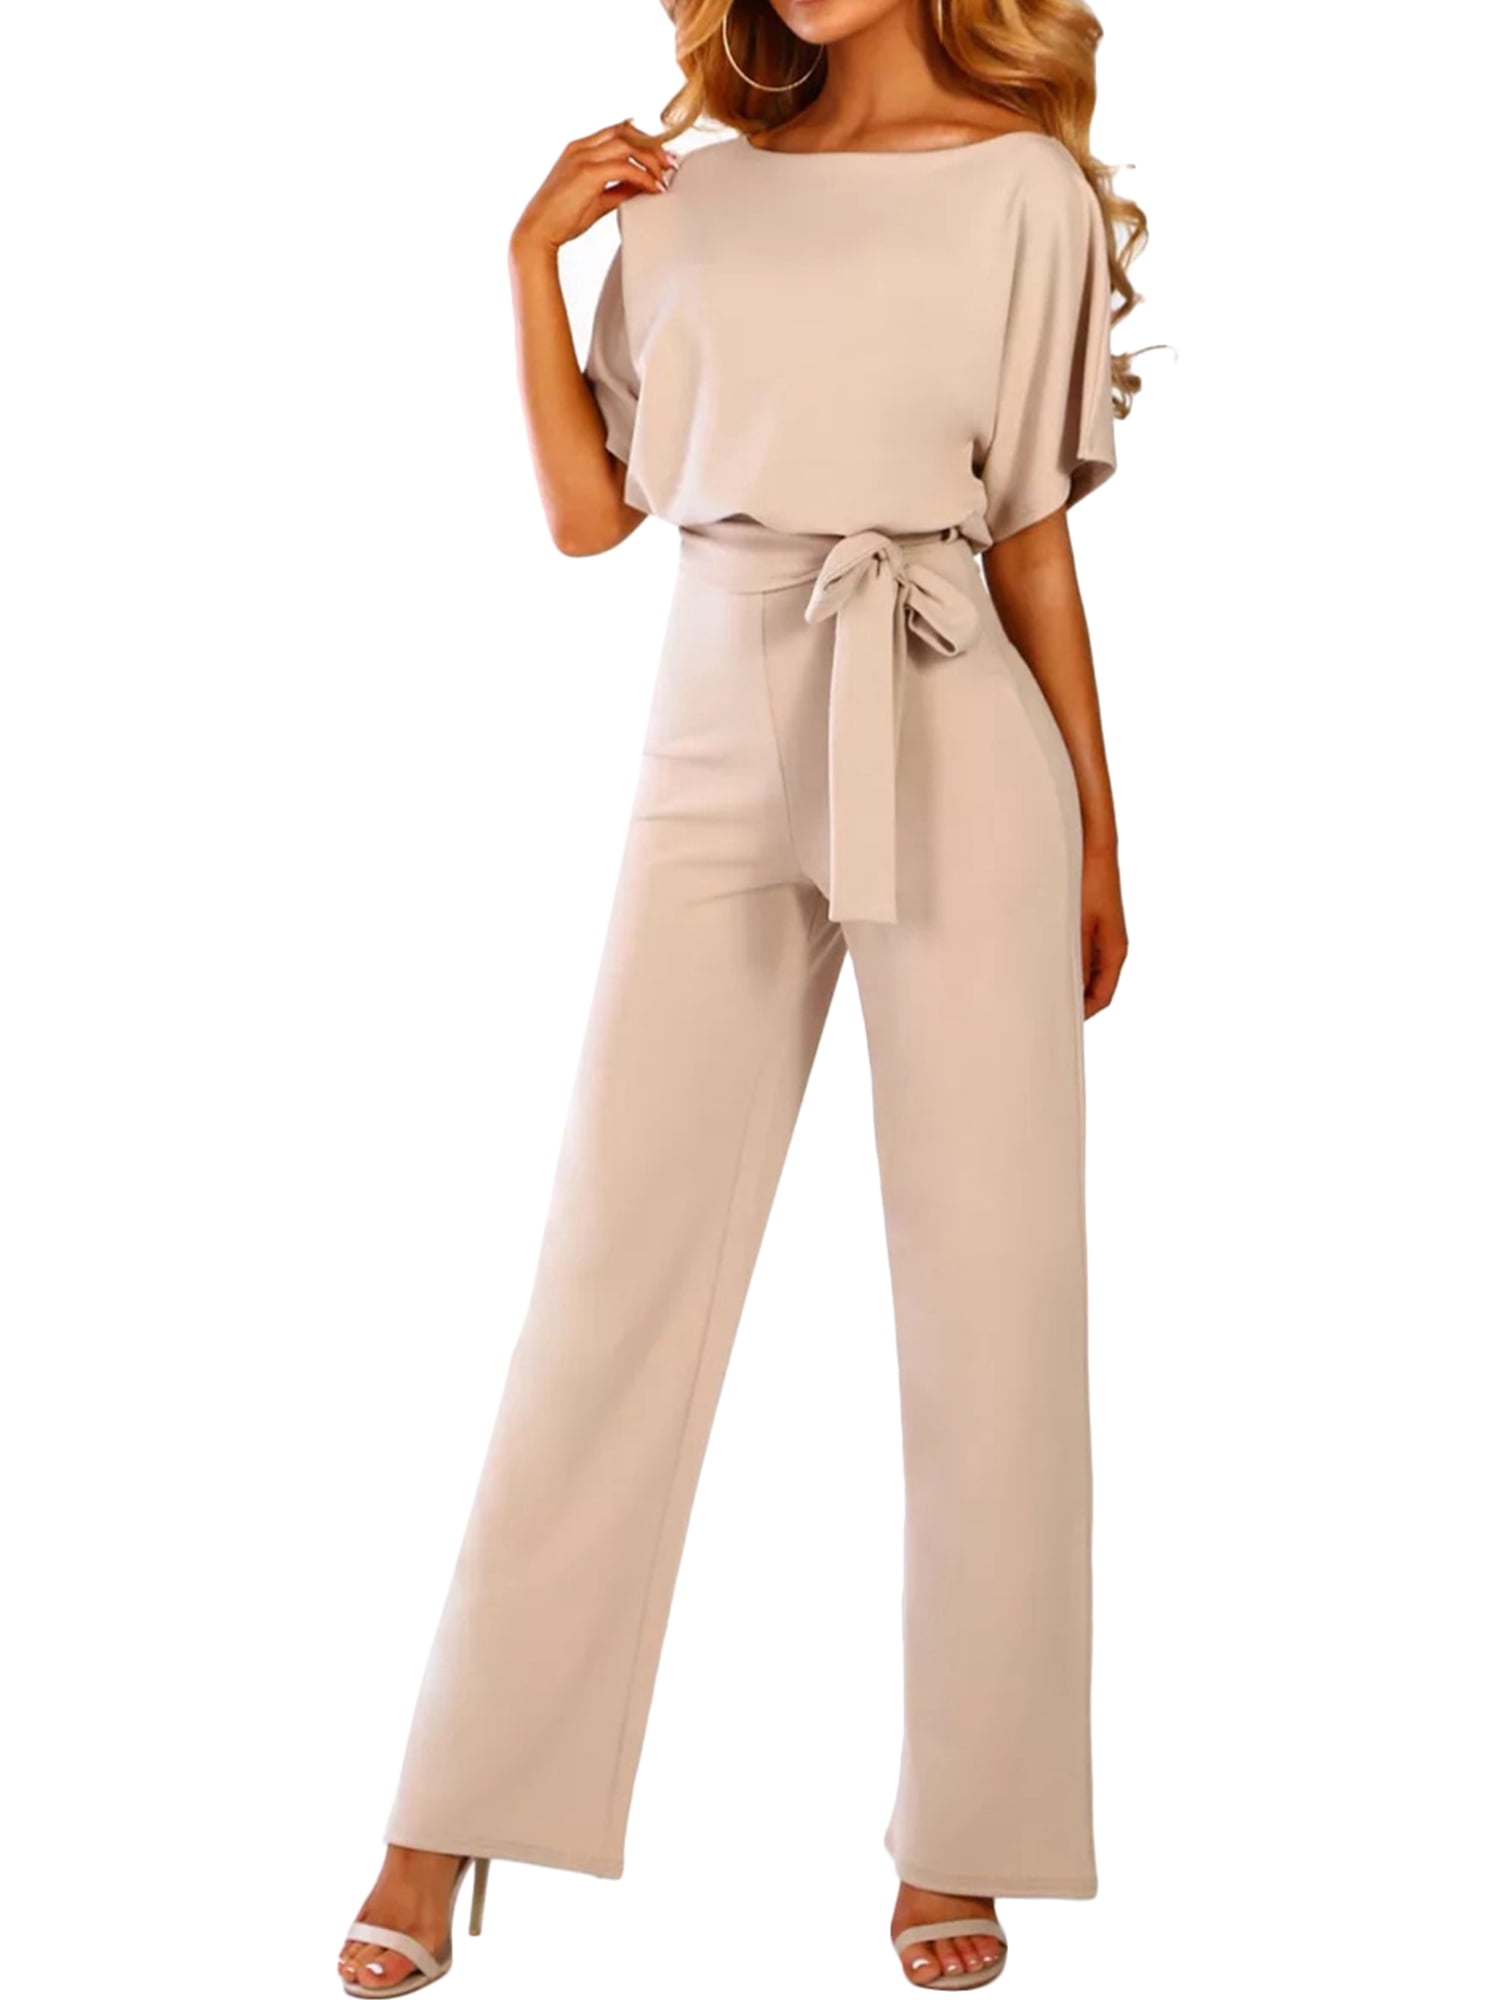 Controverse bloem Molester Womens Casual Short Sleeve Belted Jumpsuit Long Pants Back Keyhole Overall Romper  Playsuit Plus Size S-3XL - Walmart.com